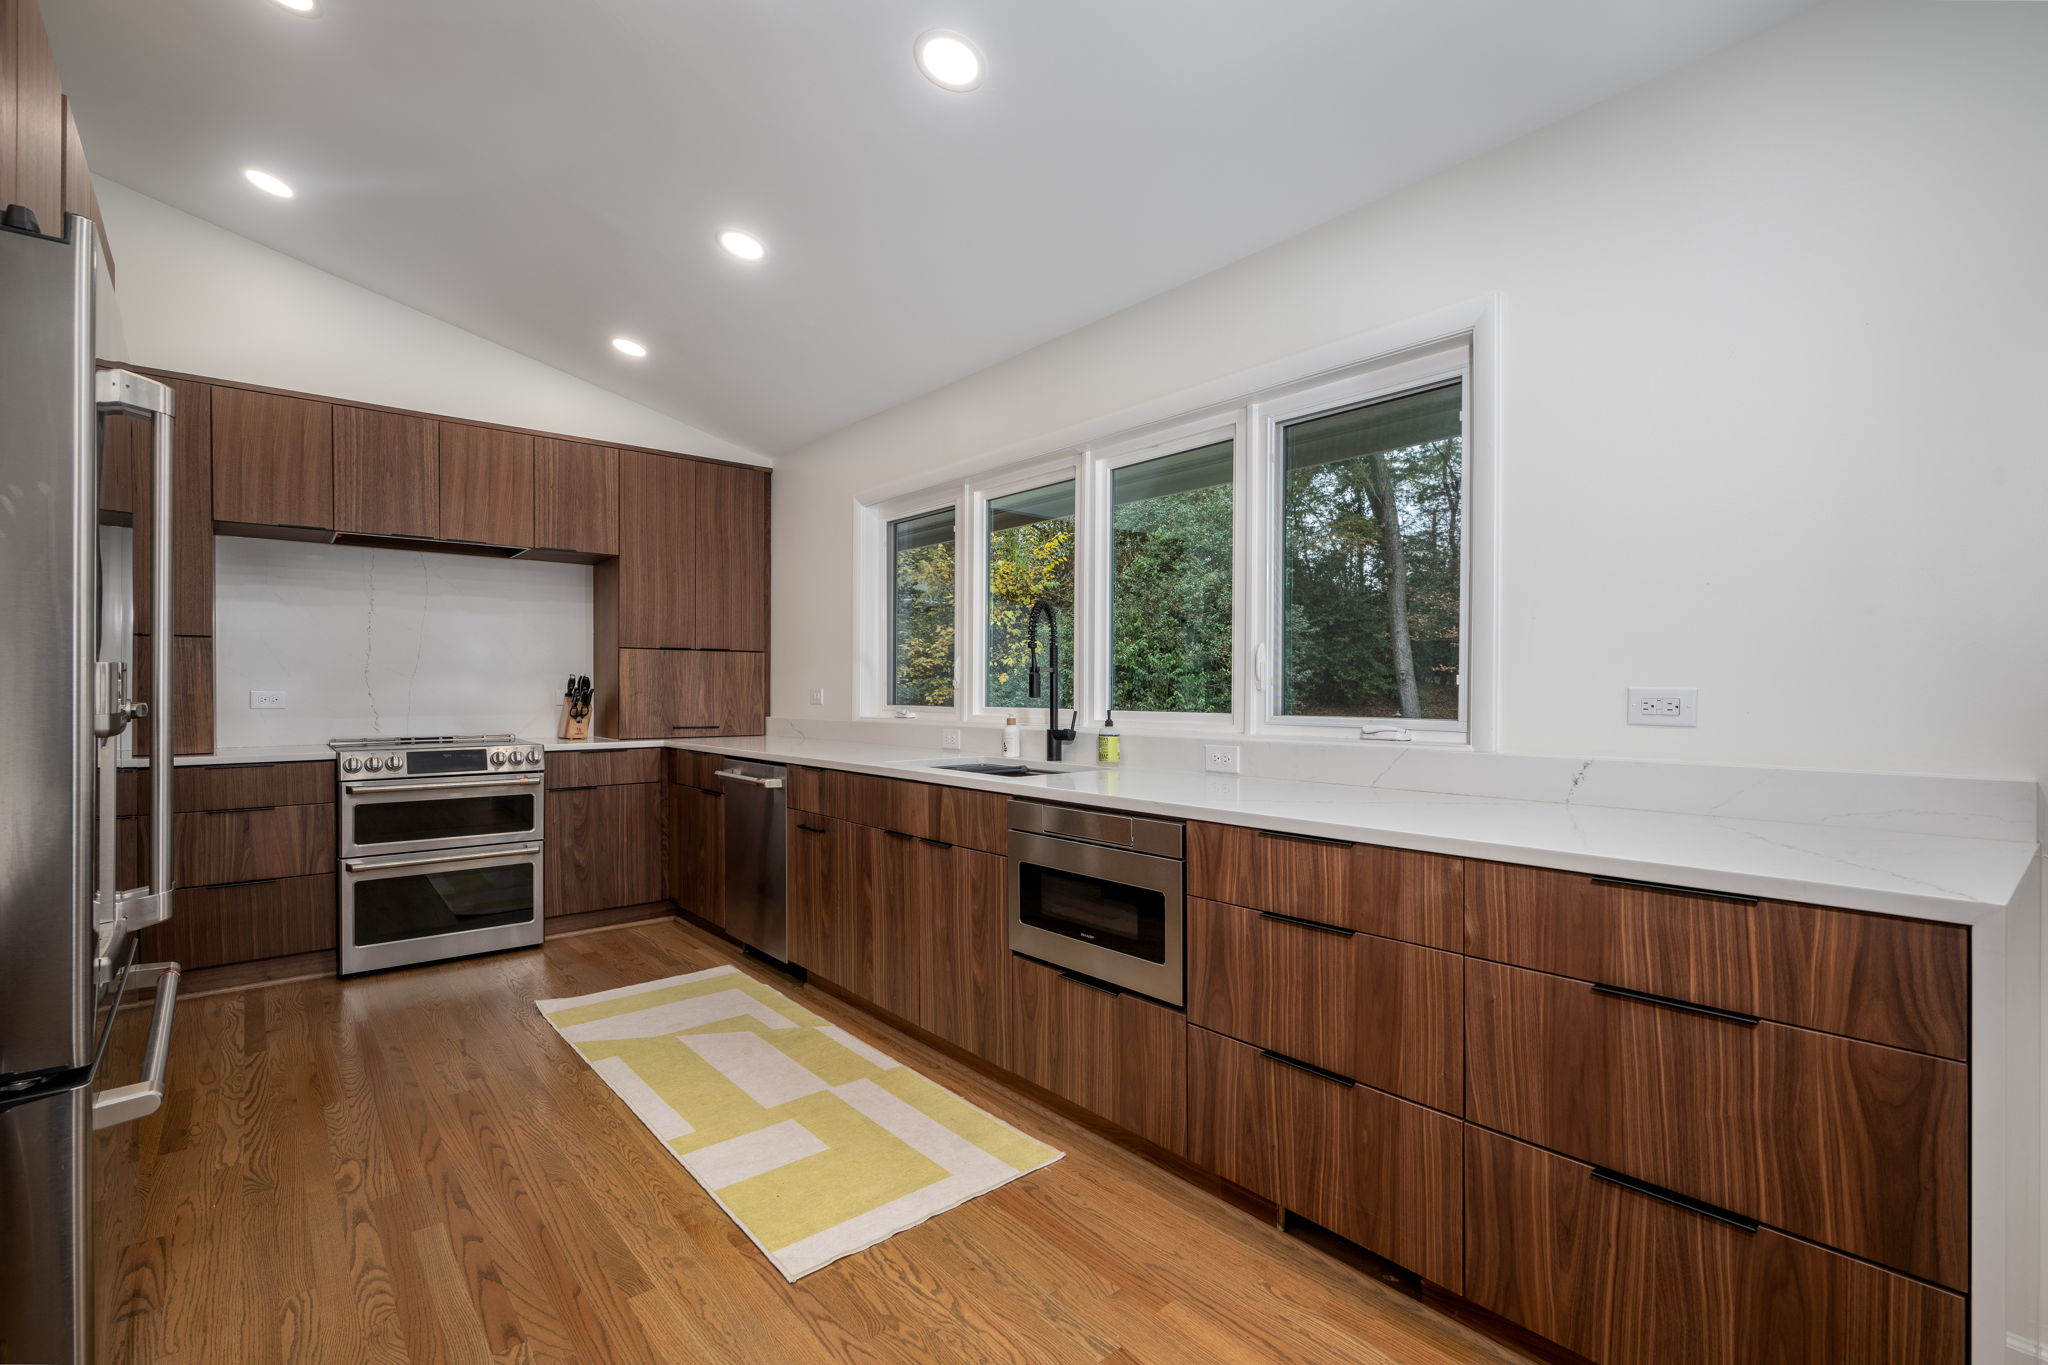 Modern kitchen, one of the most popular remodeling projects, with wooden cabinets, stainless steel appliances, and white countertops. A green and yellow rug is on the wooden floor near the sink.